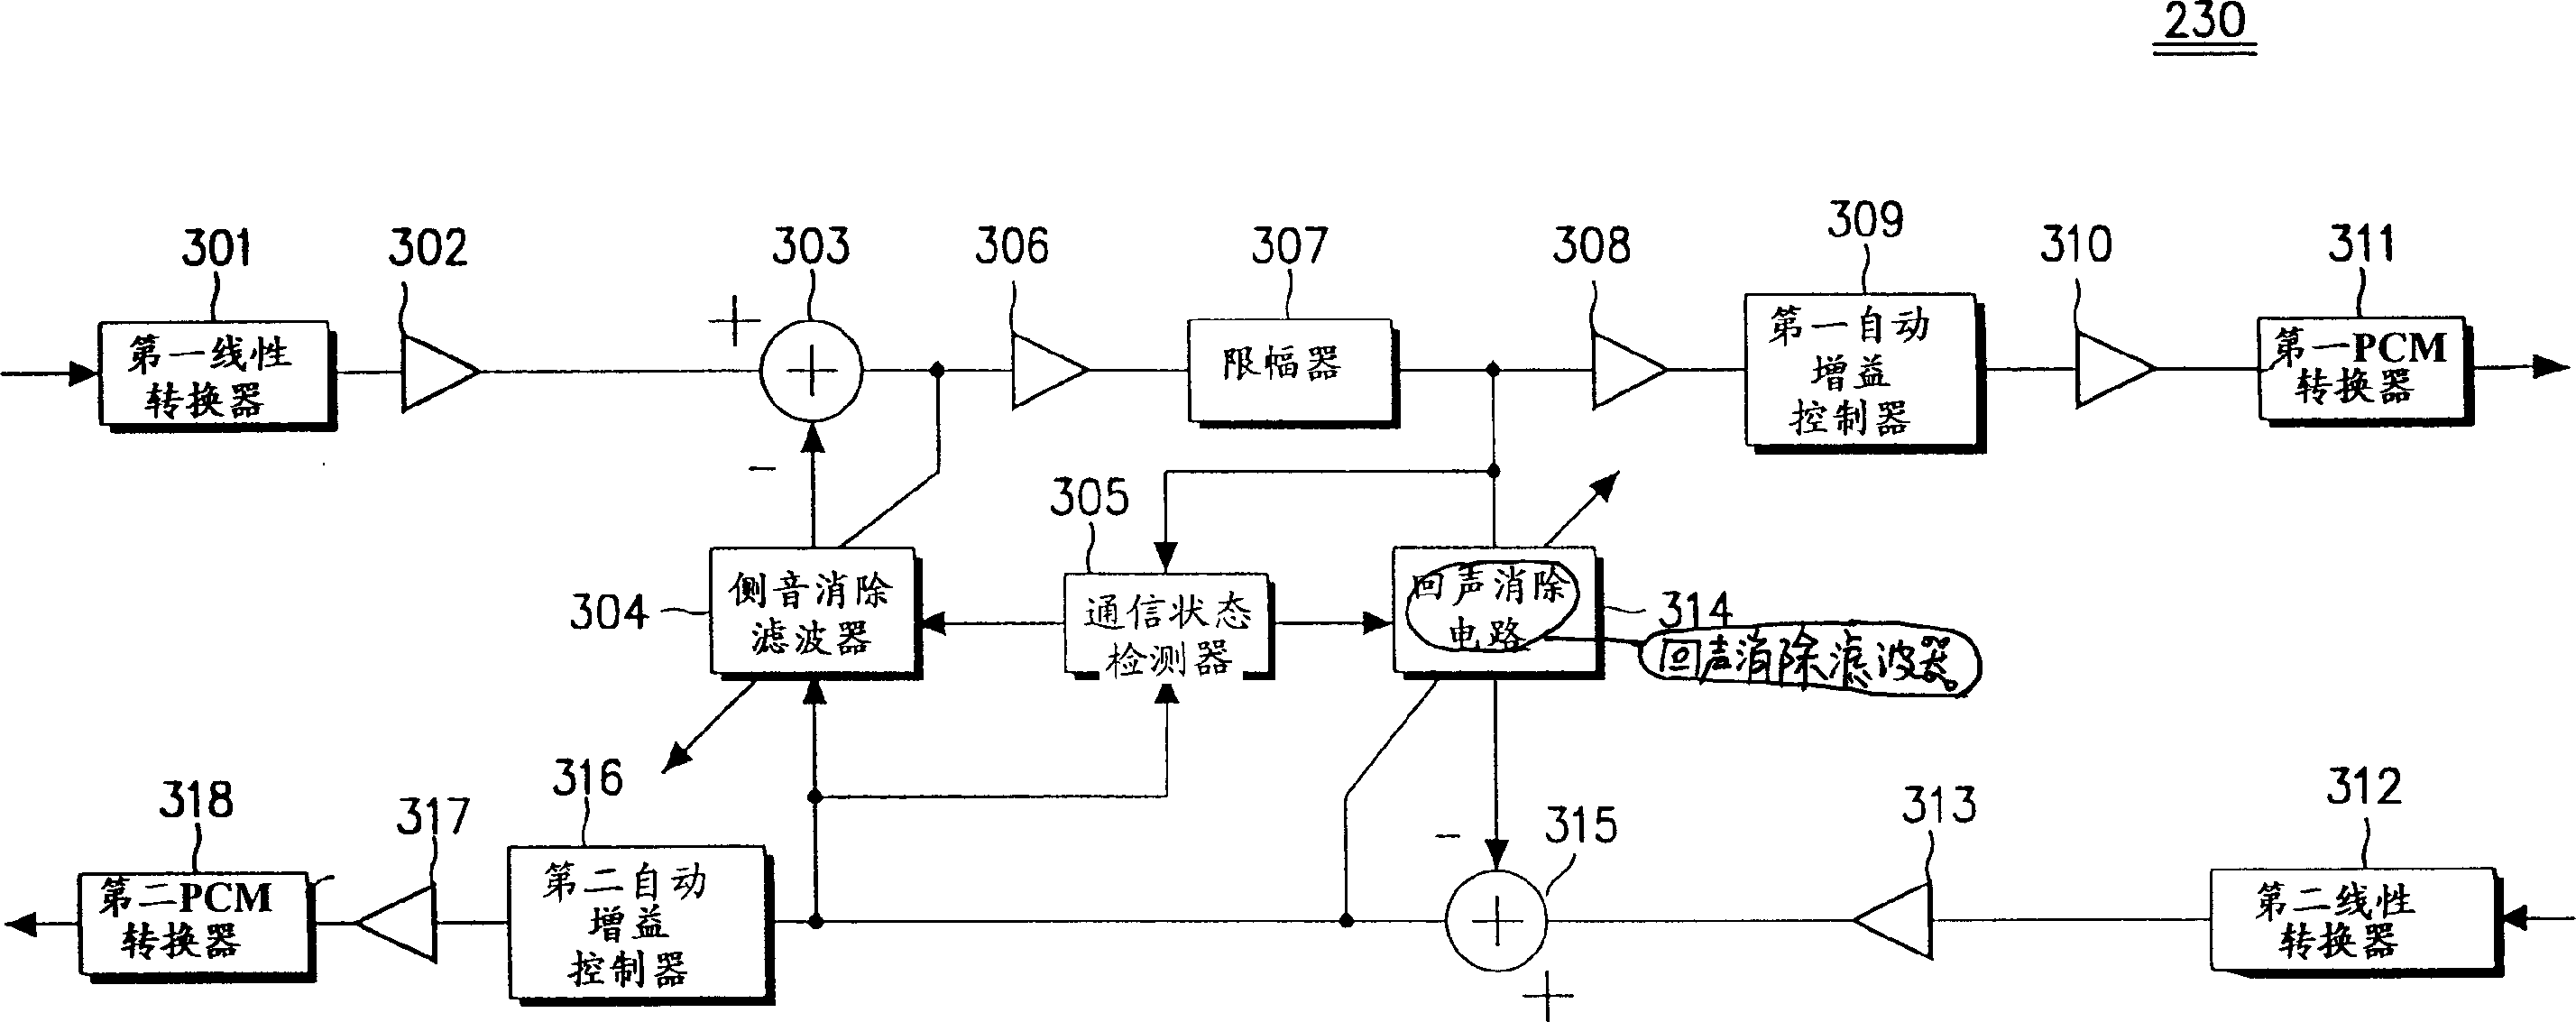 Circuit for eliminating echo and side tone in switch system